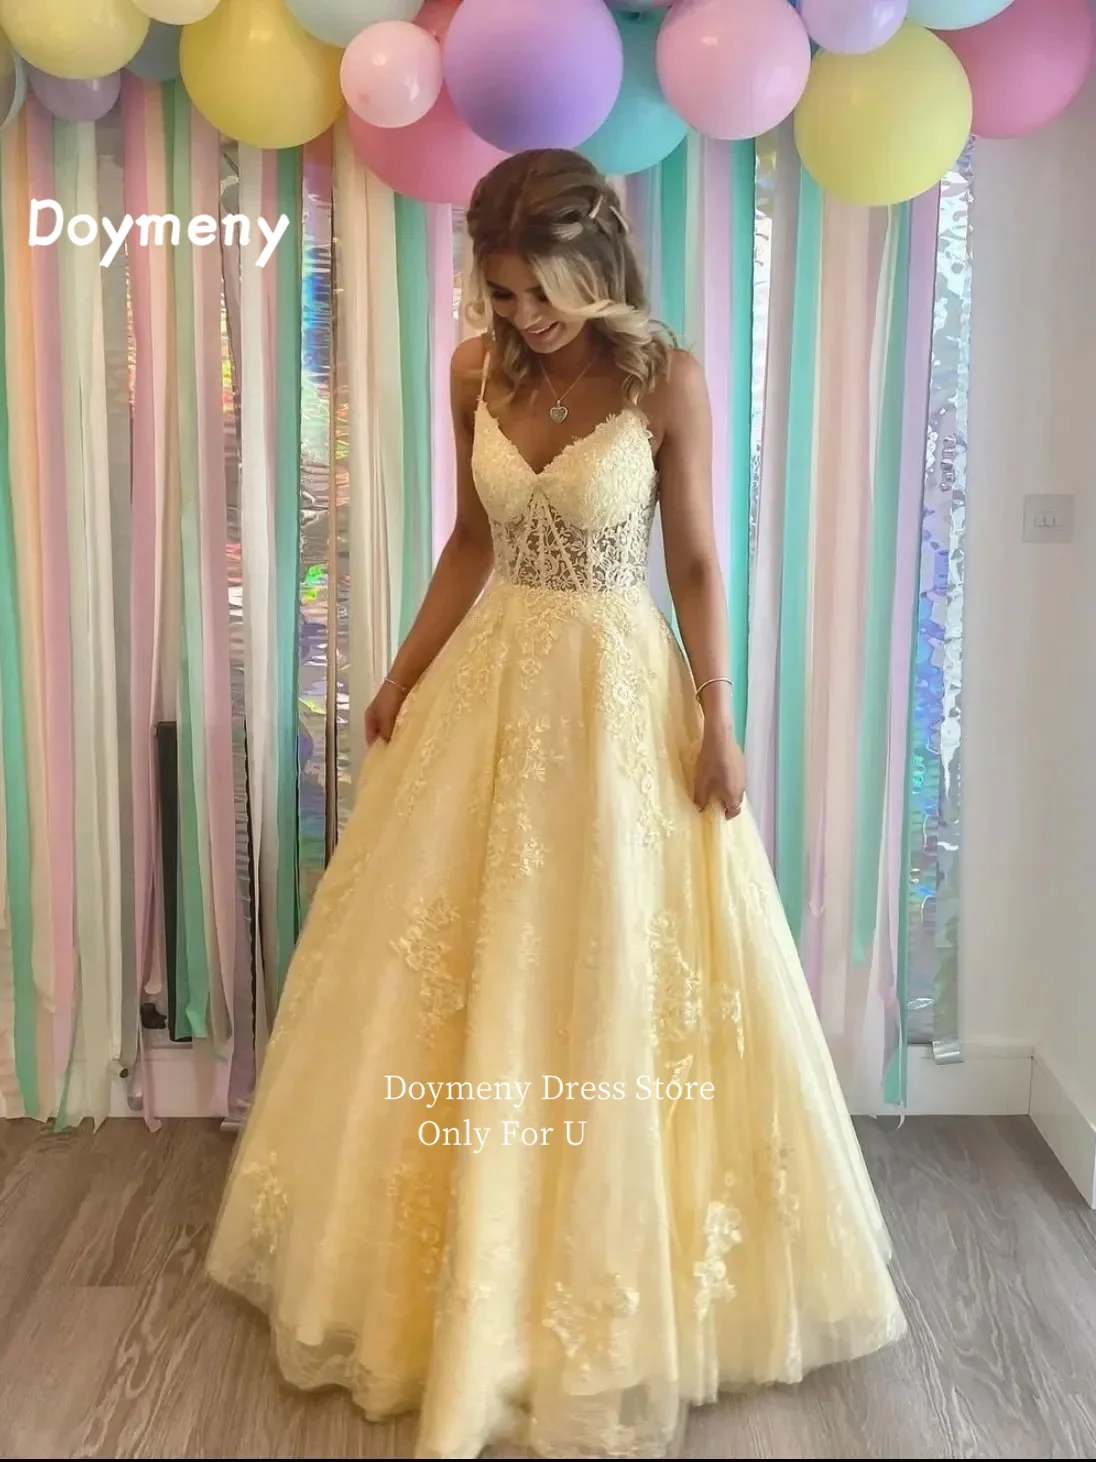 

Doymeny Spaghetti Strap A Line Prom Dresses Applique Lace Sleeveless Floor Length Corset Back Formal Party Evening Gowns